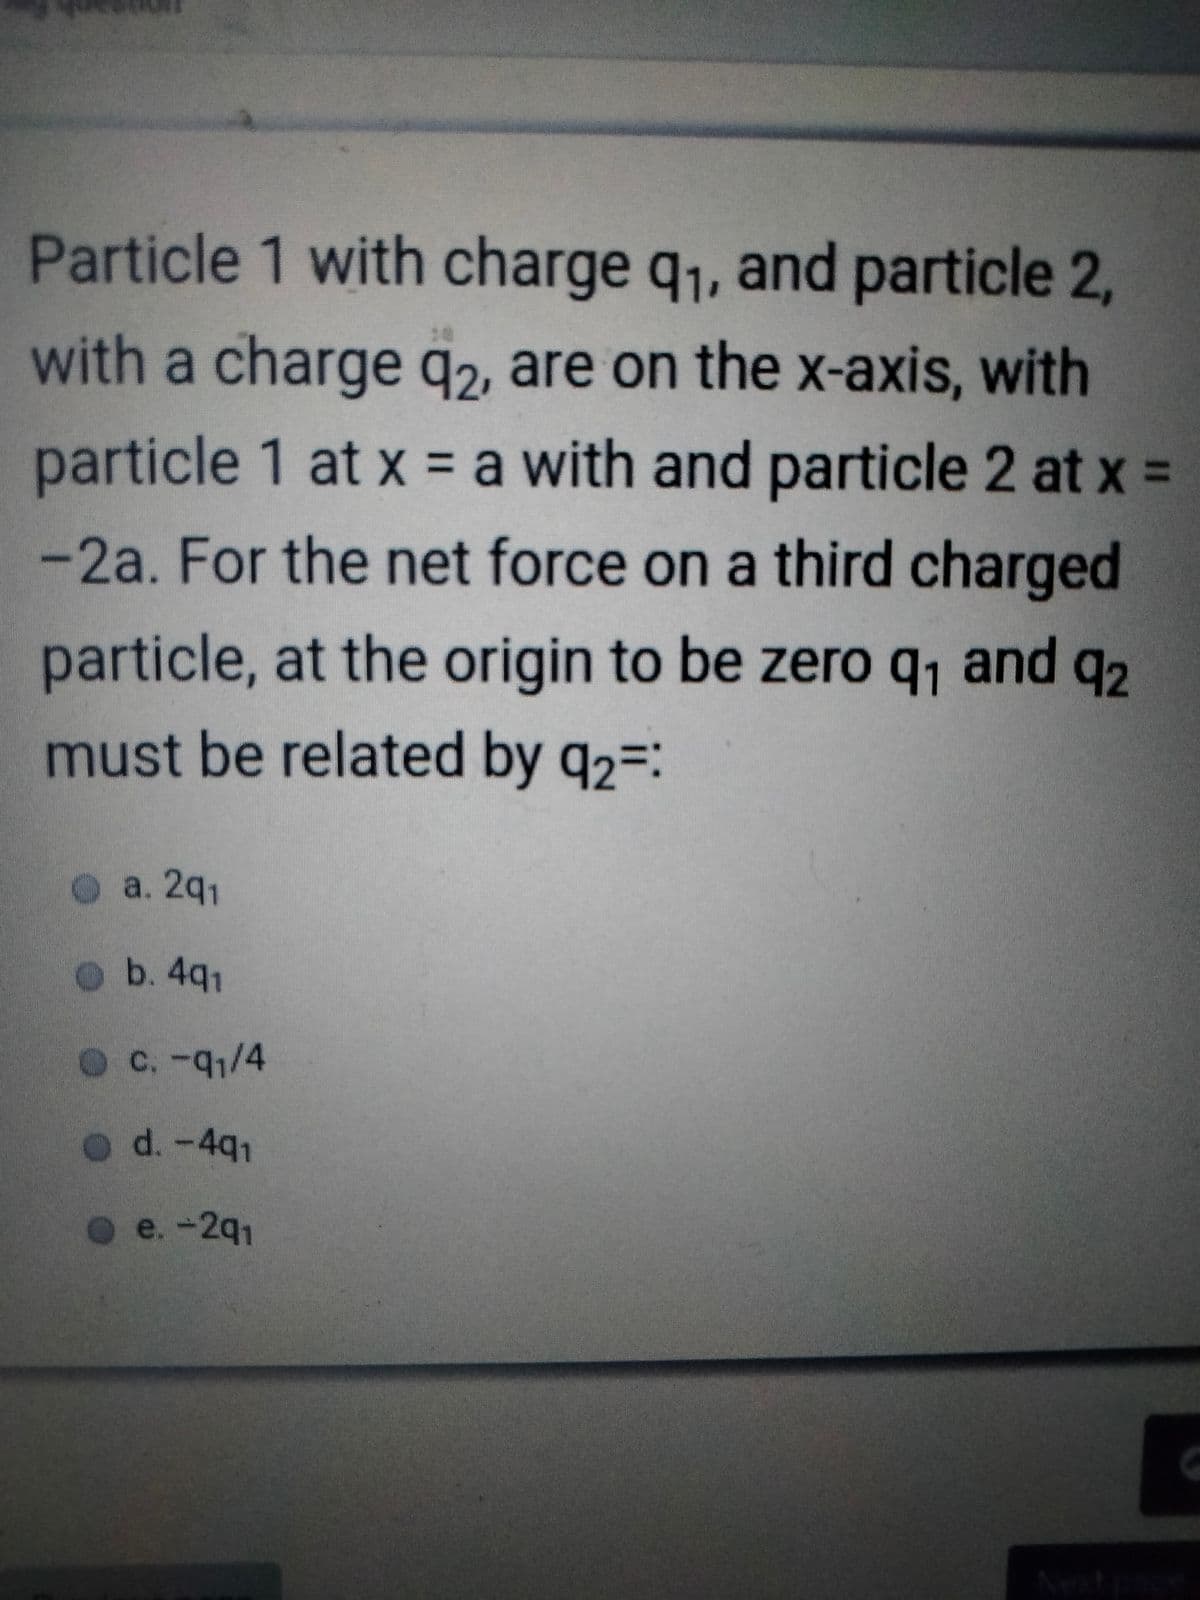 Particle 1 with charge q1, and particle 2,
with a charge q2, are on the x-axis, with
particle 1 at x = a with and particle 2 at x =
-2a. For the net force on a third charged
particle, at the origin to be zero q, and q2
must be related by q2=:
O a. 2q1
ob. 4q1
C.-q1/4
d. -491
o e.-2q1
